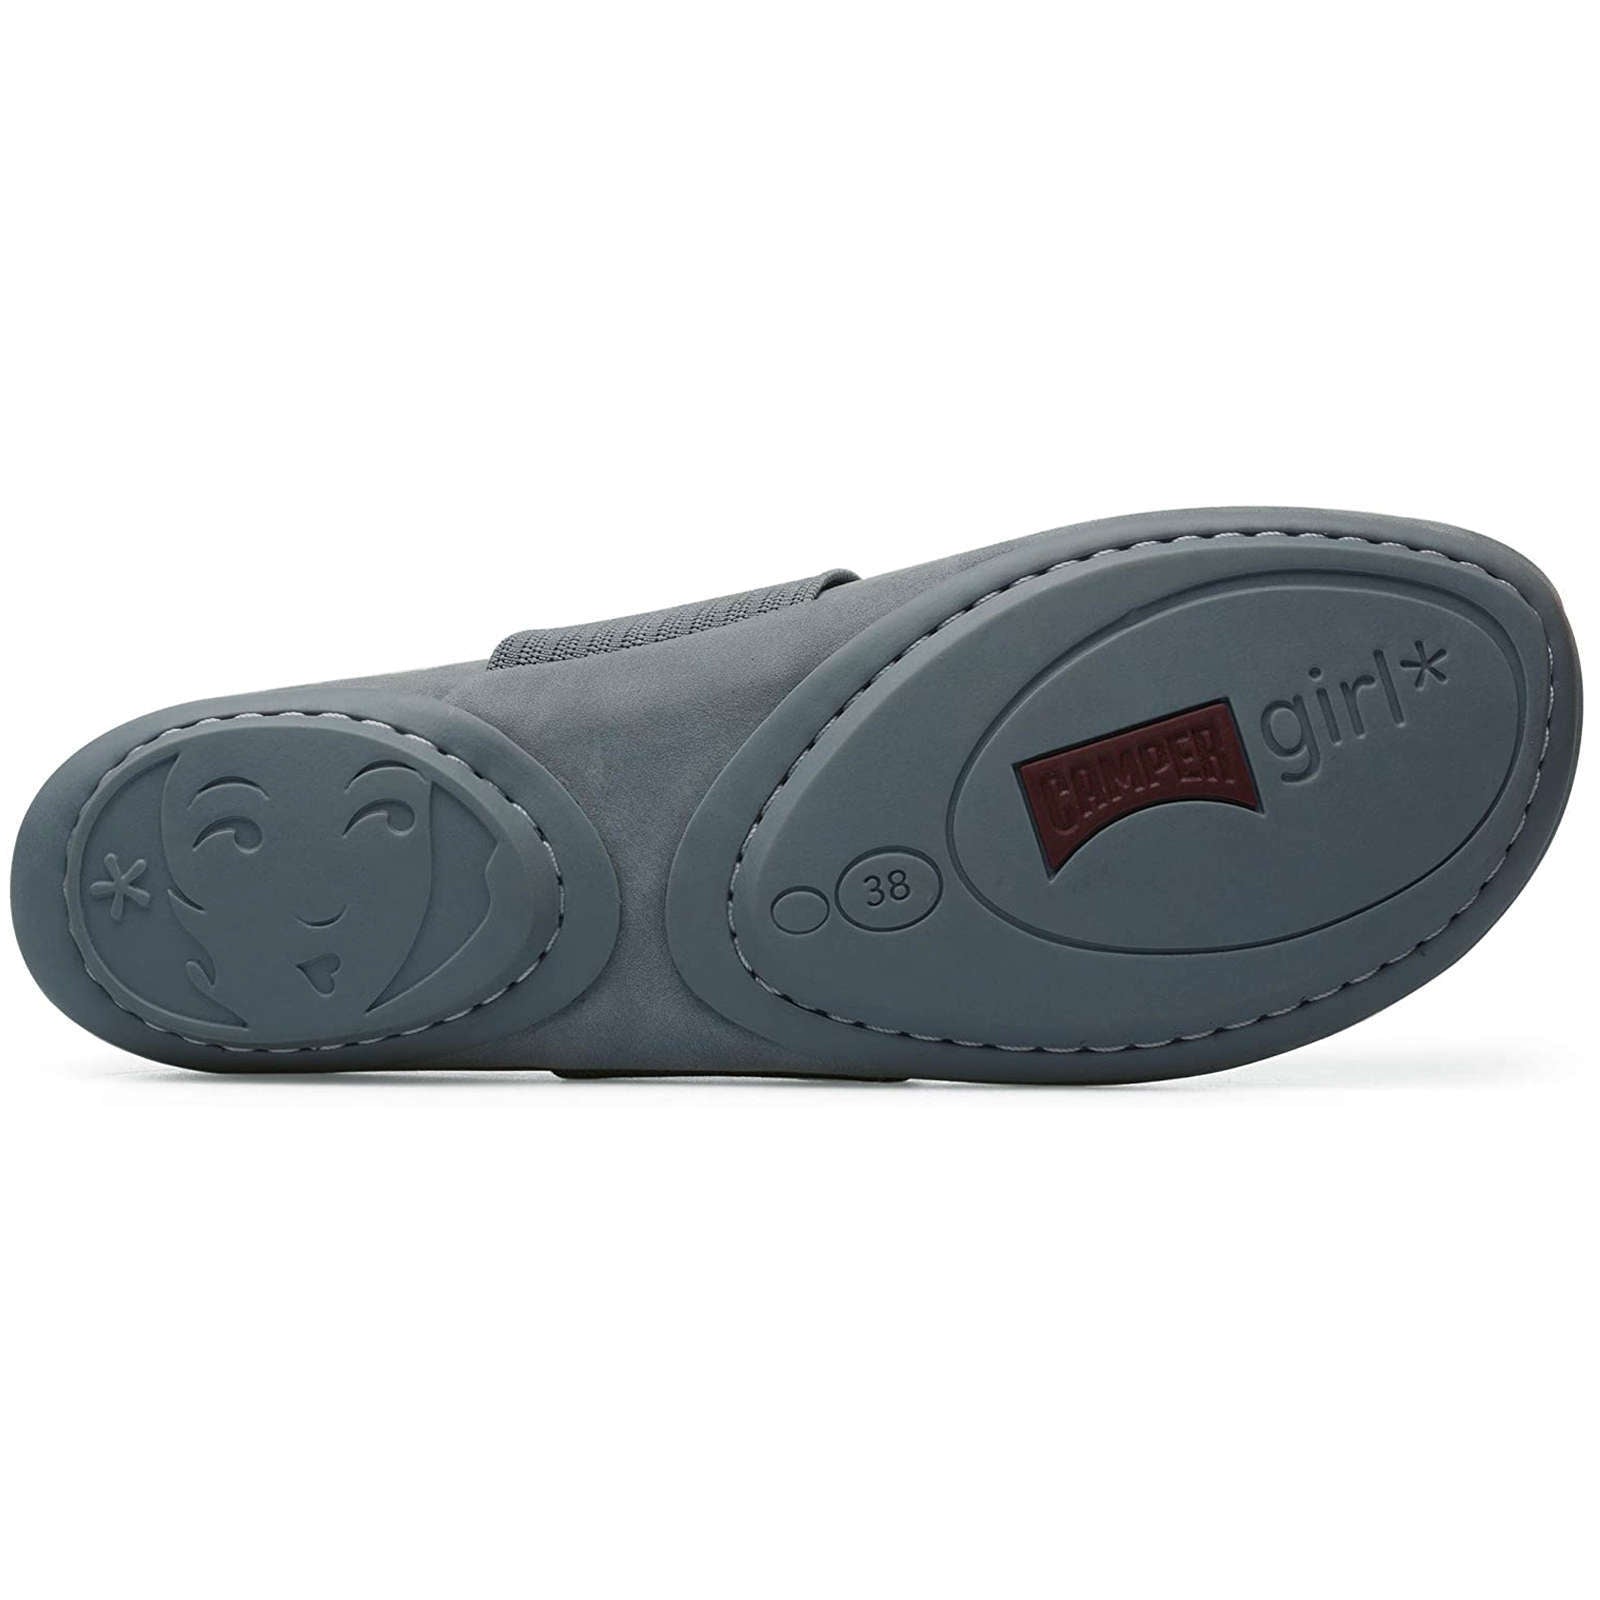 Camper Right Nubuck Leather Women's Moccassins#color_light grey